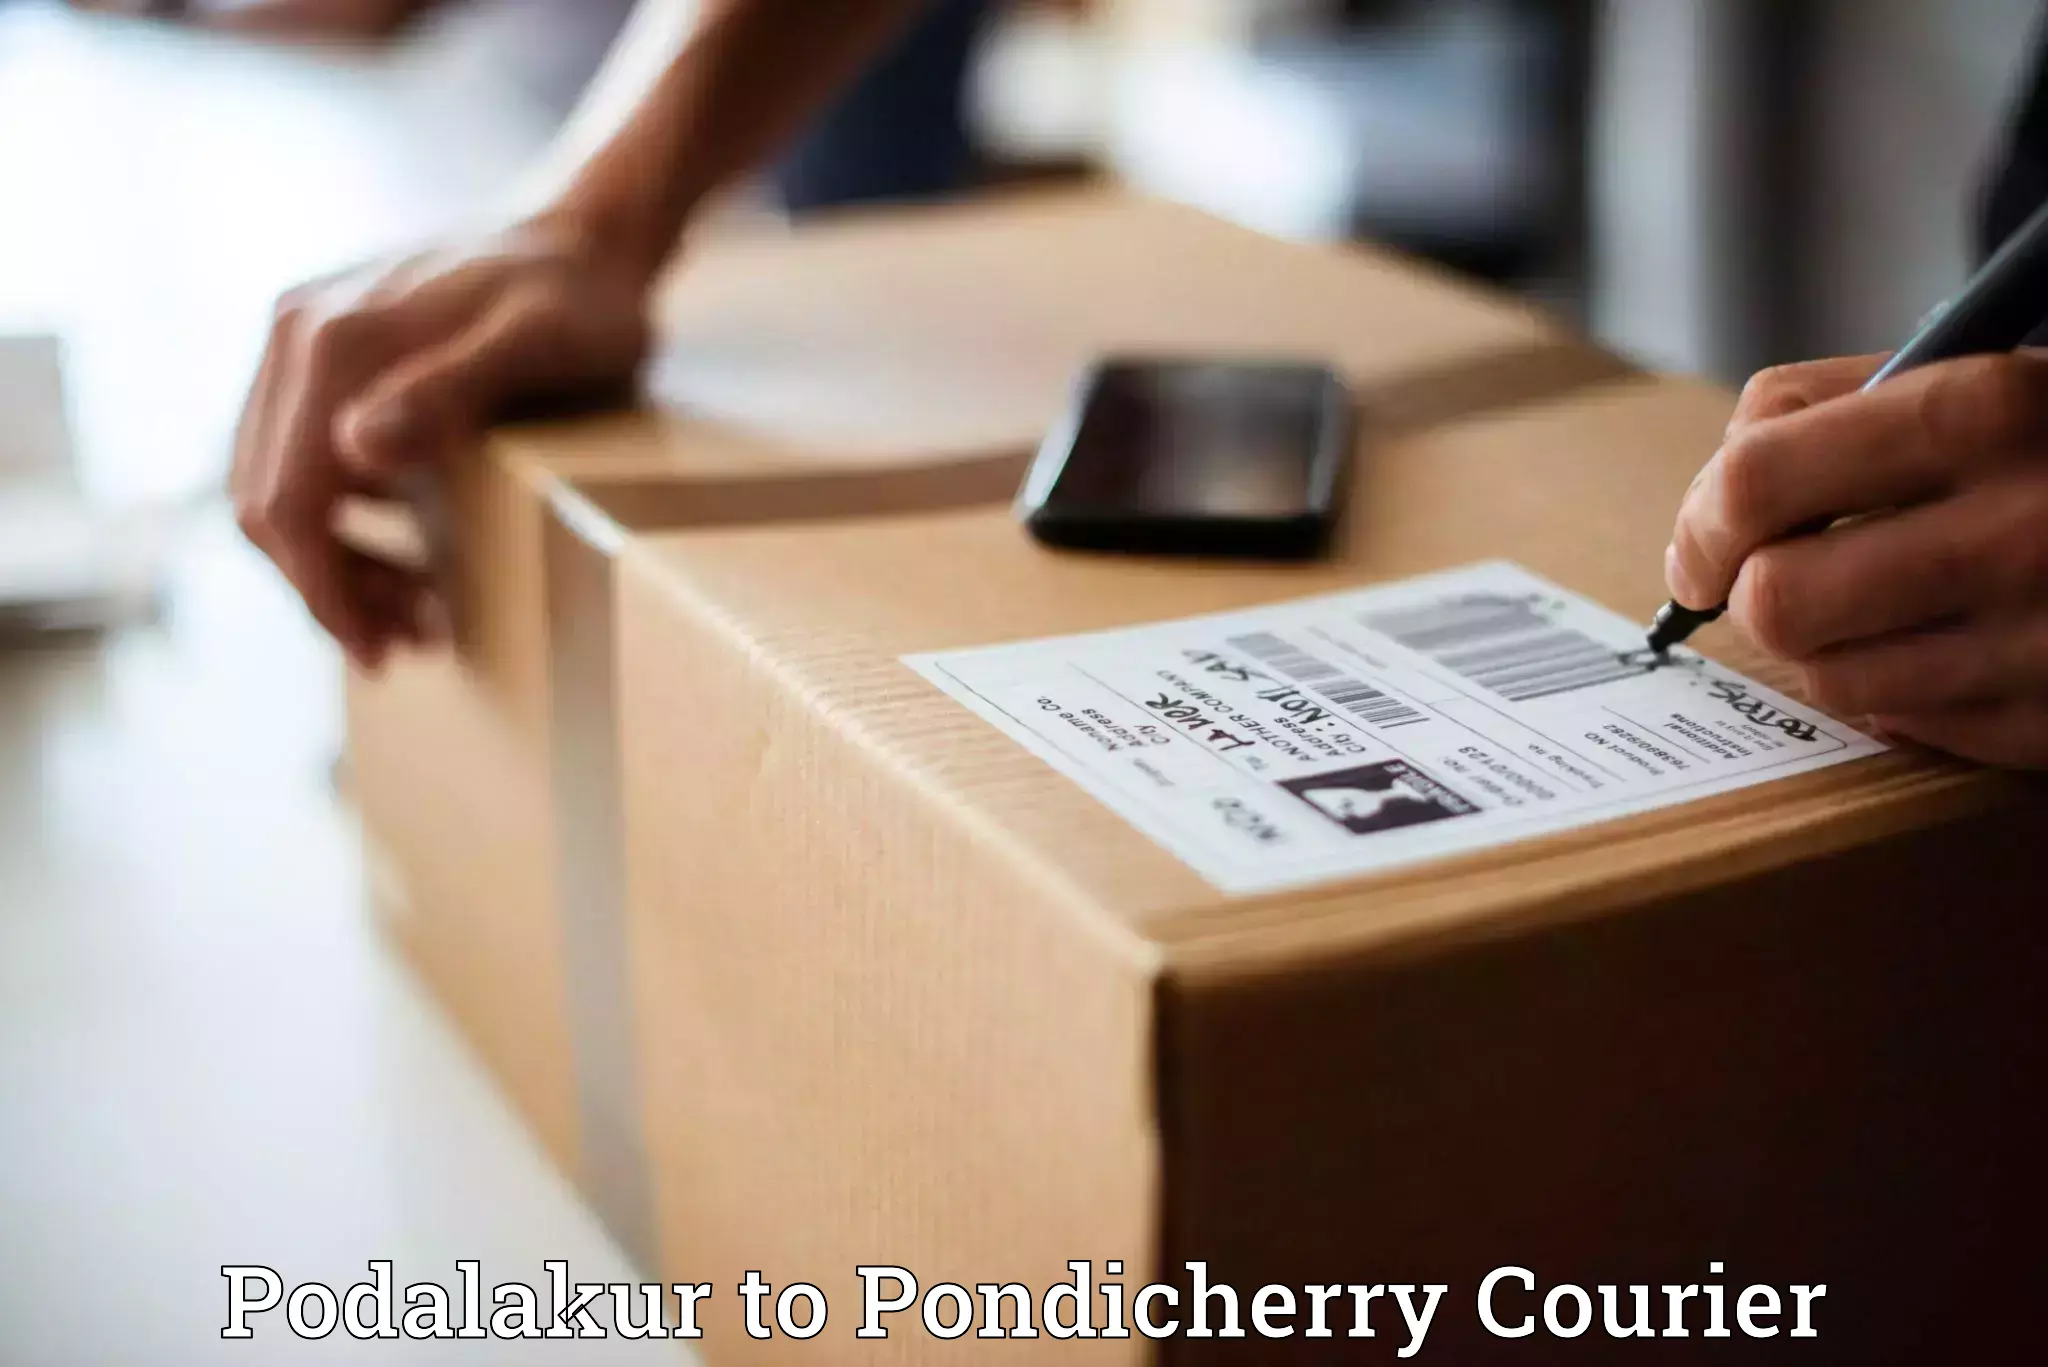 Nationwide delivery network Podalakur to Pondicherry University